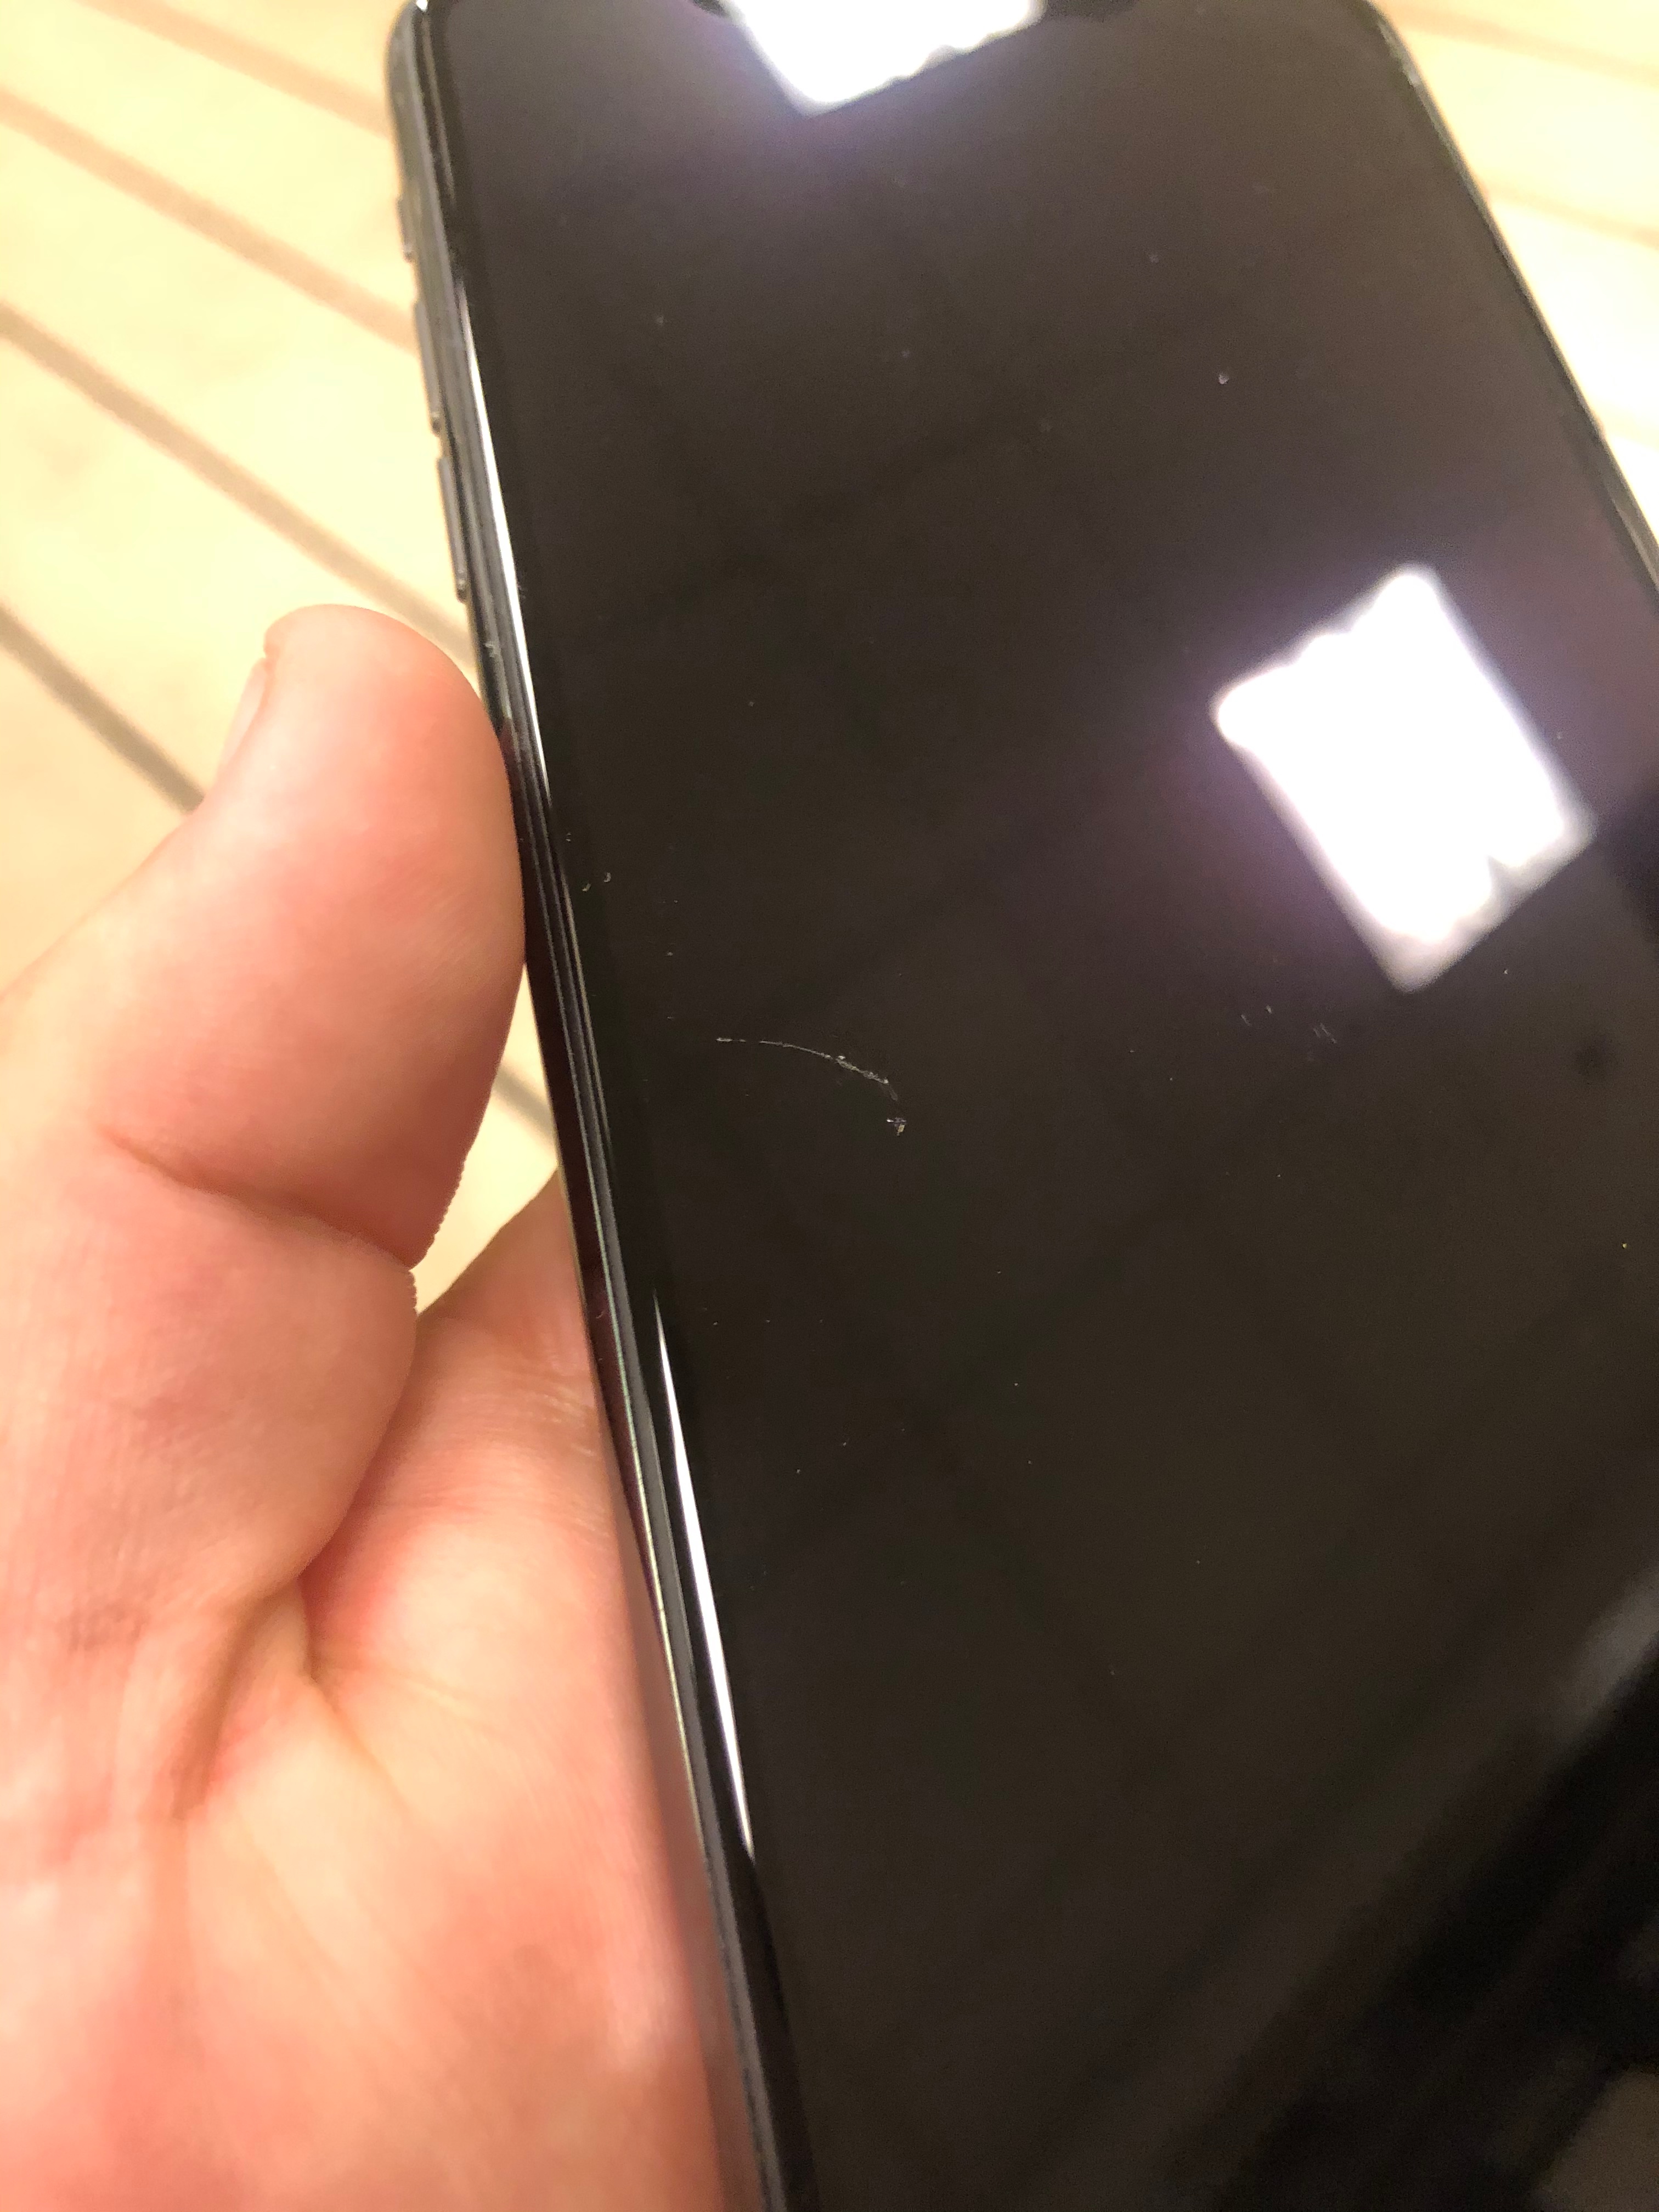 Why do new phones scratch so easily?